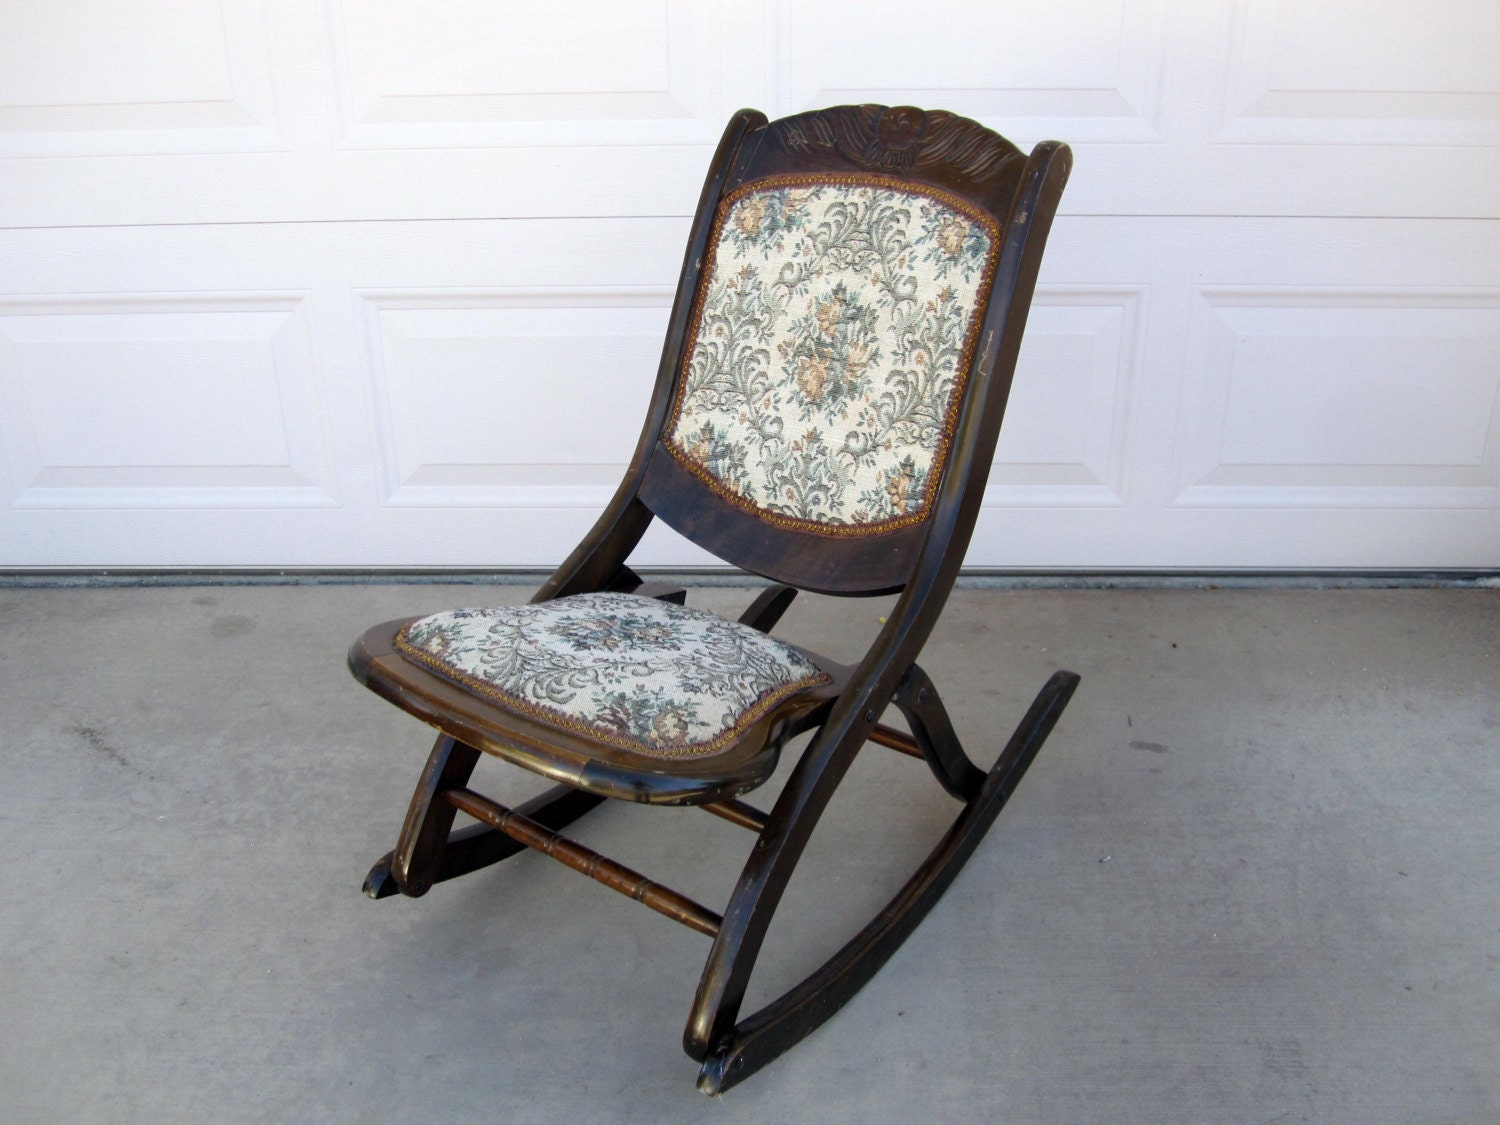 Antique Mahogany Folding Rocking Chair with Floral Patterned